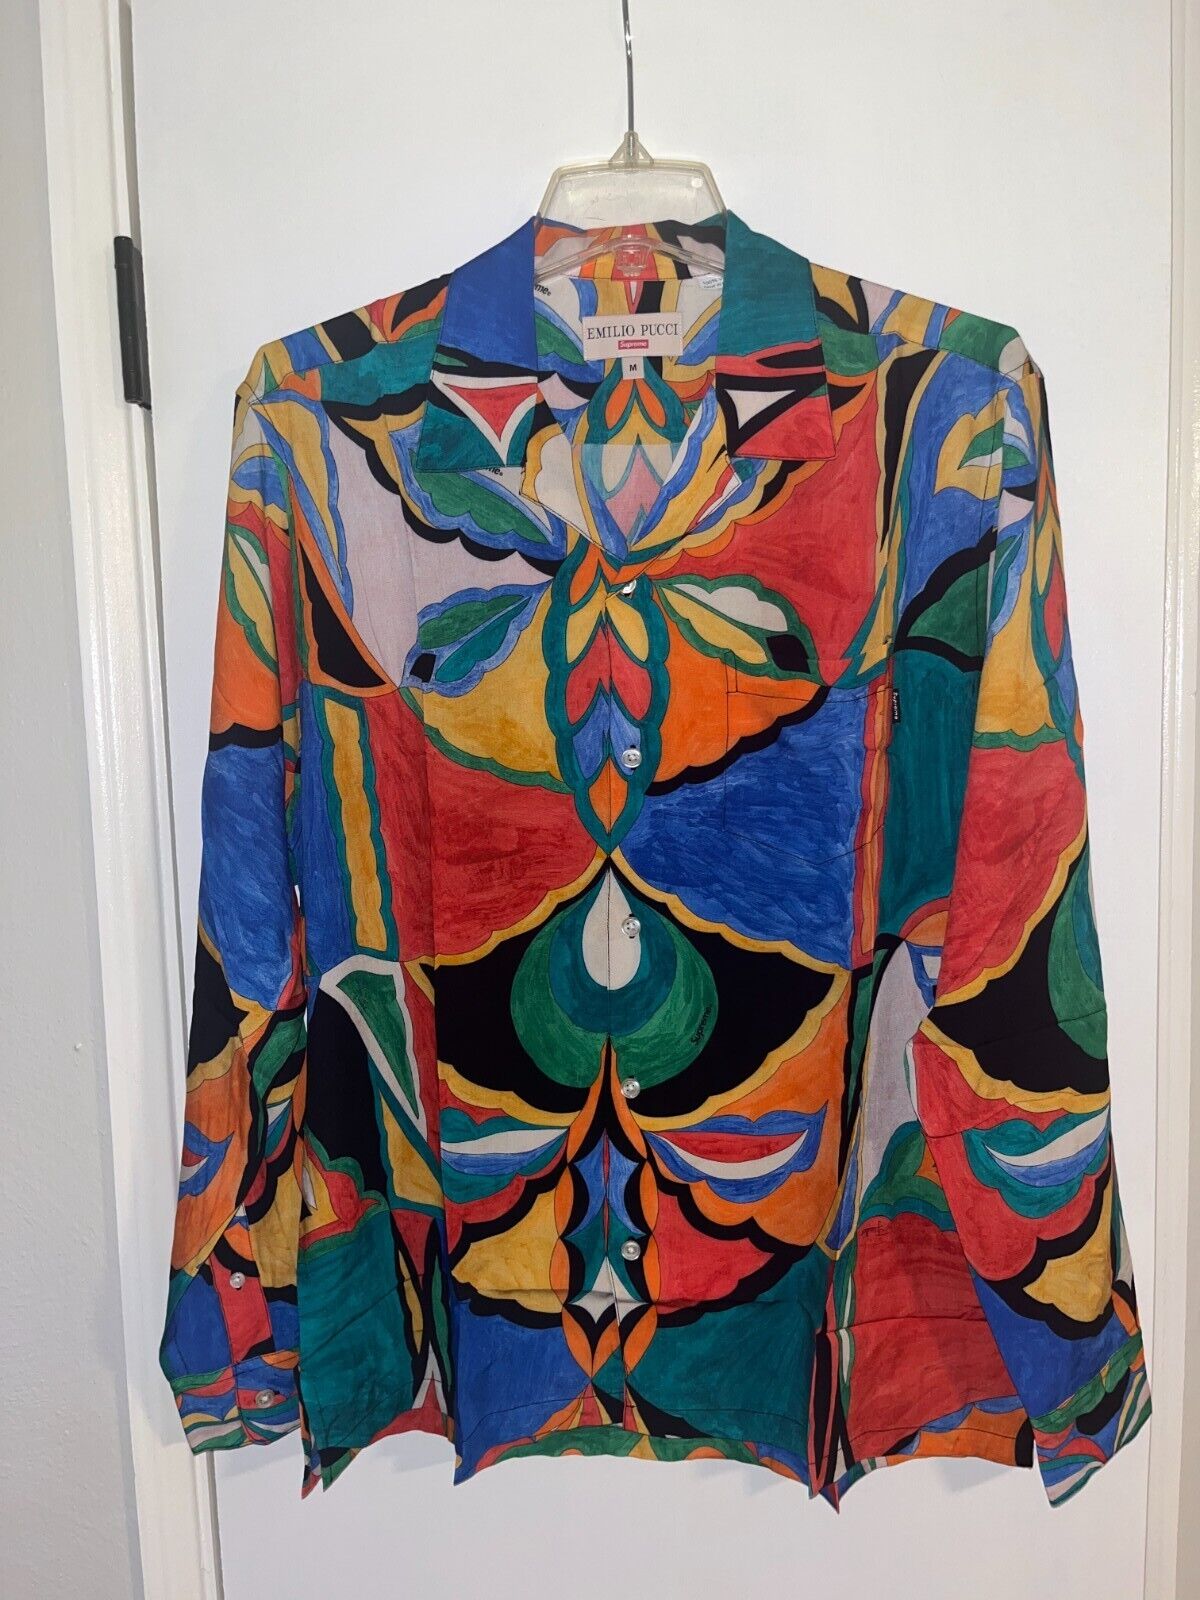 Mens Supreme x Emilio Pucci silk shirt size Large new with tags